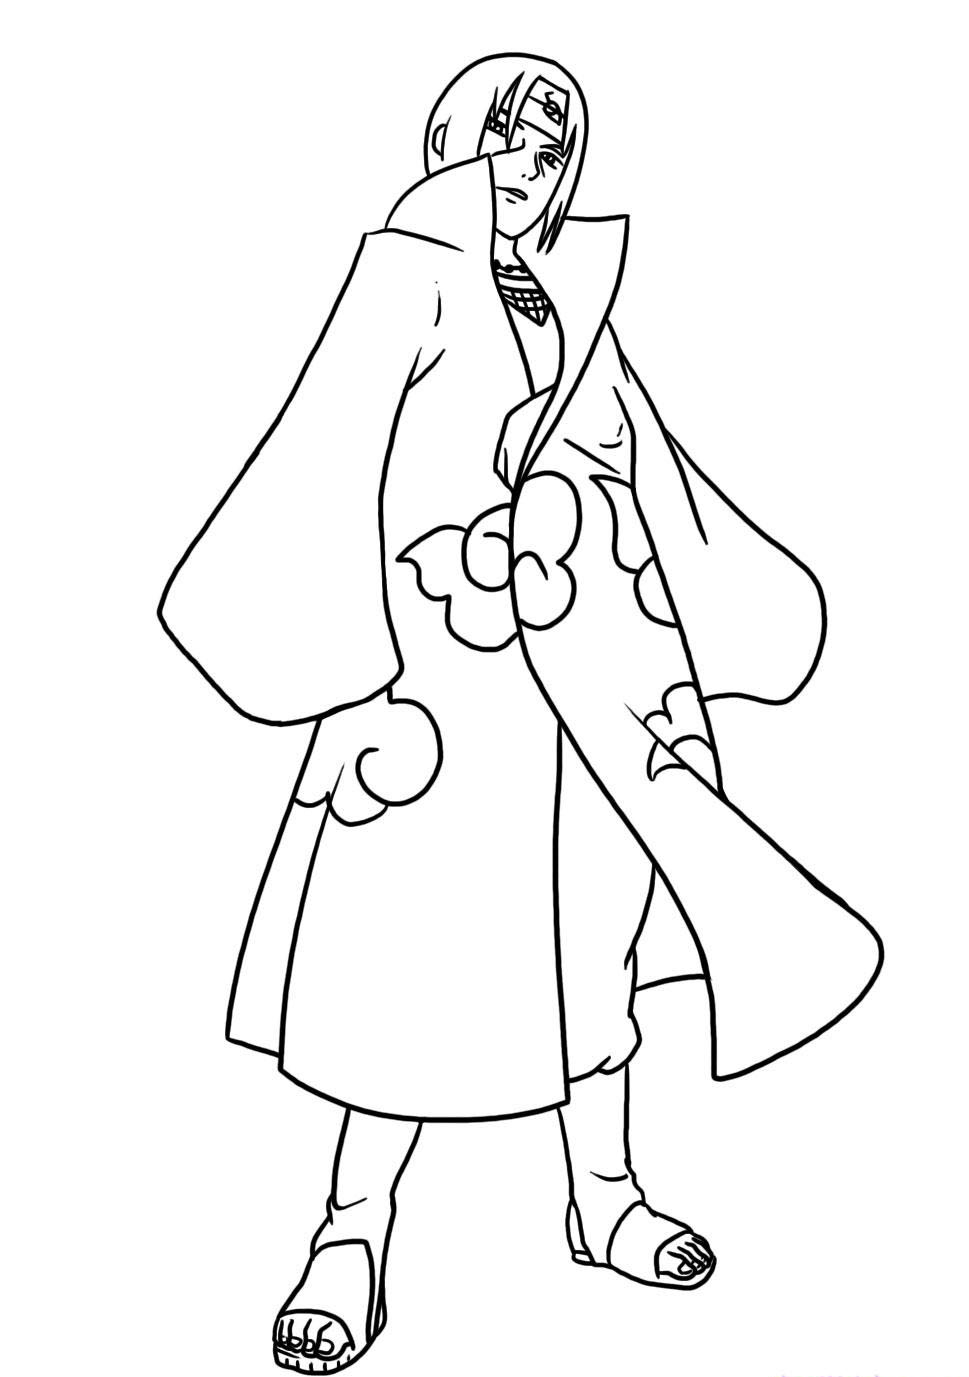 Cartoon Itachi Uchiha Coloring Pages for Kids